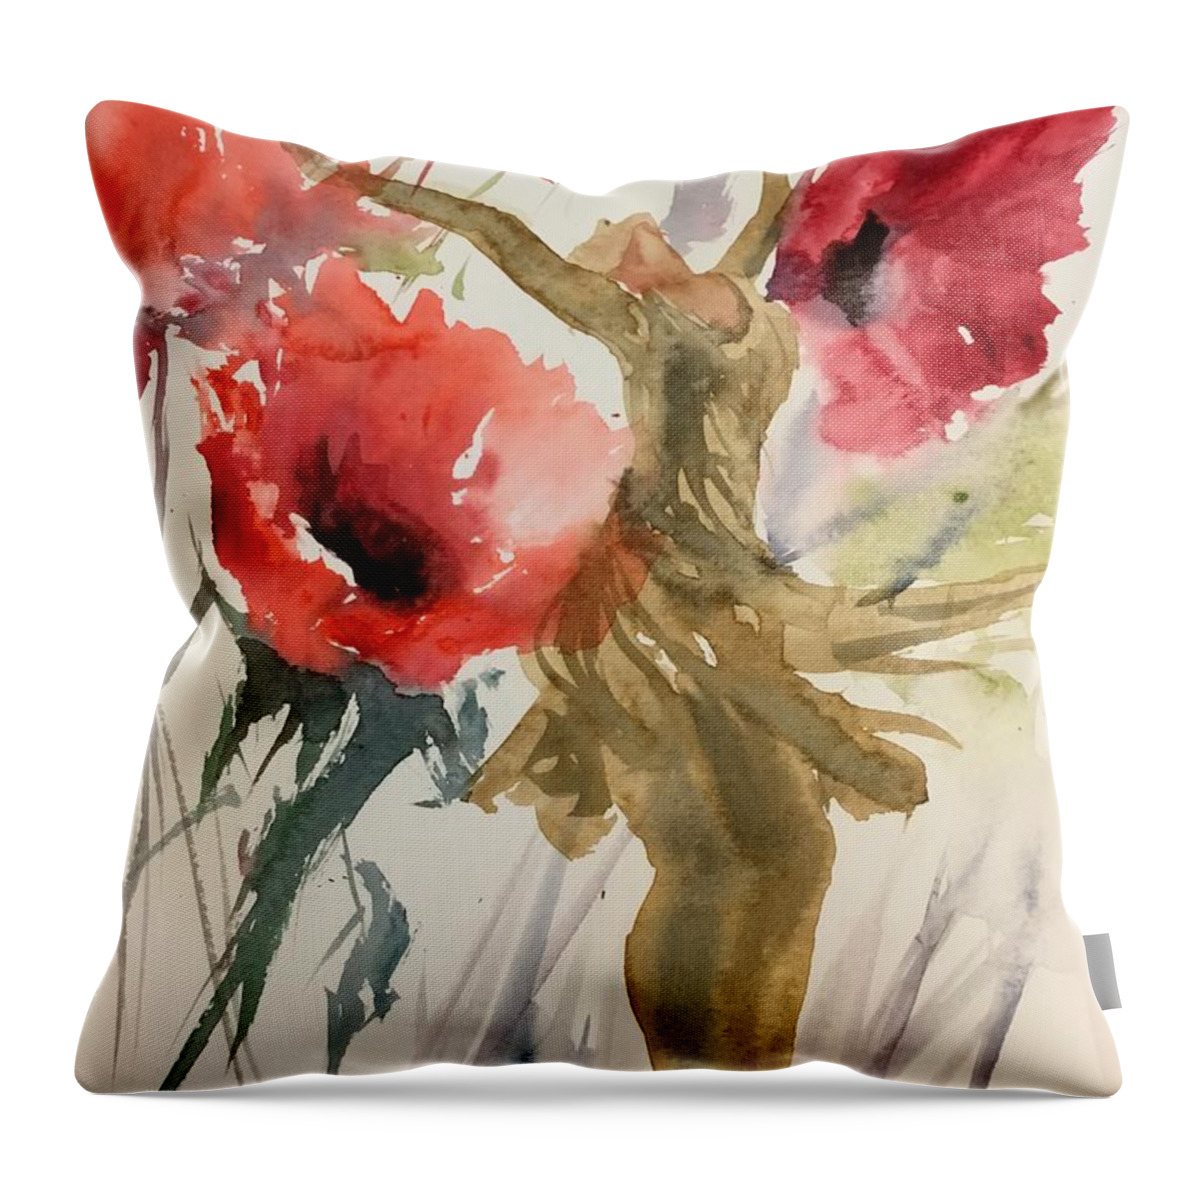 1362019 Throw Pillow featuring the painting 1362019 by Han in Huang wong